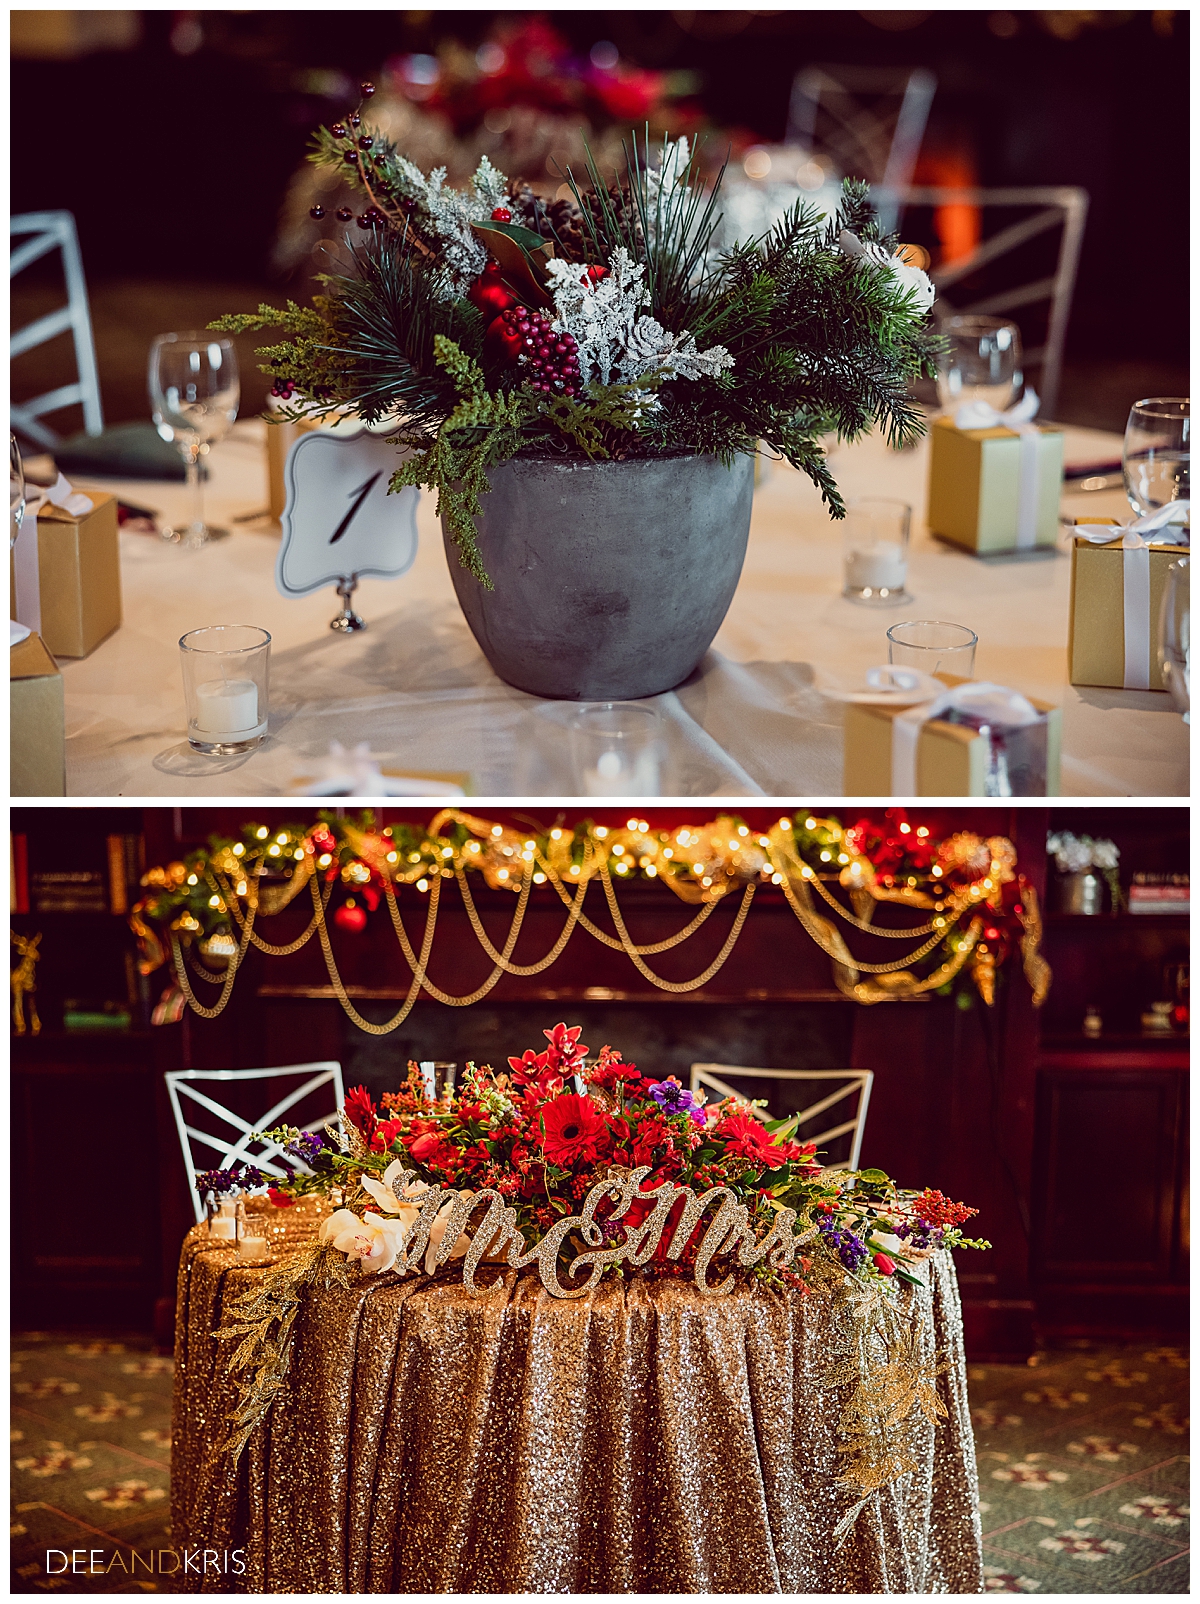 Two images: Top image of holiday-themed floral centerpiece. Bottom image of sweethearts table with gold tablecloth and Mr. and Mrs, sign in front of floral arrangement.